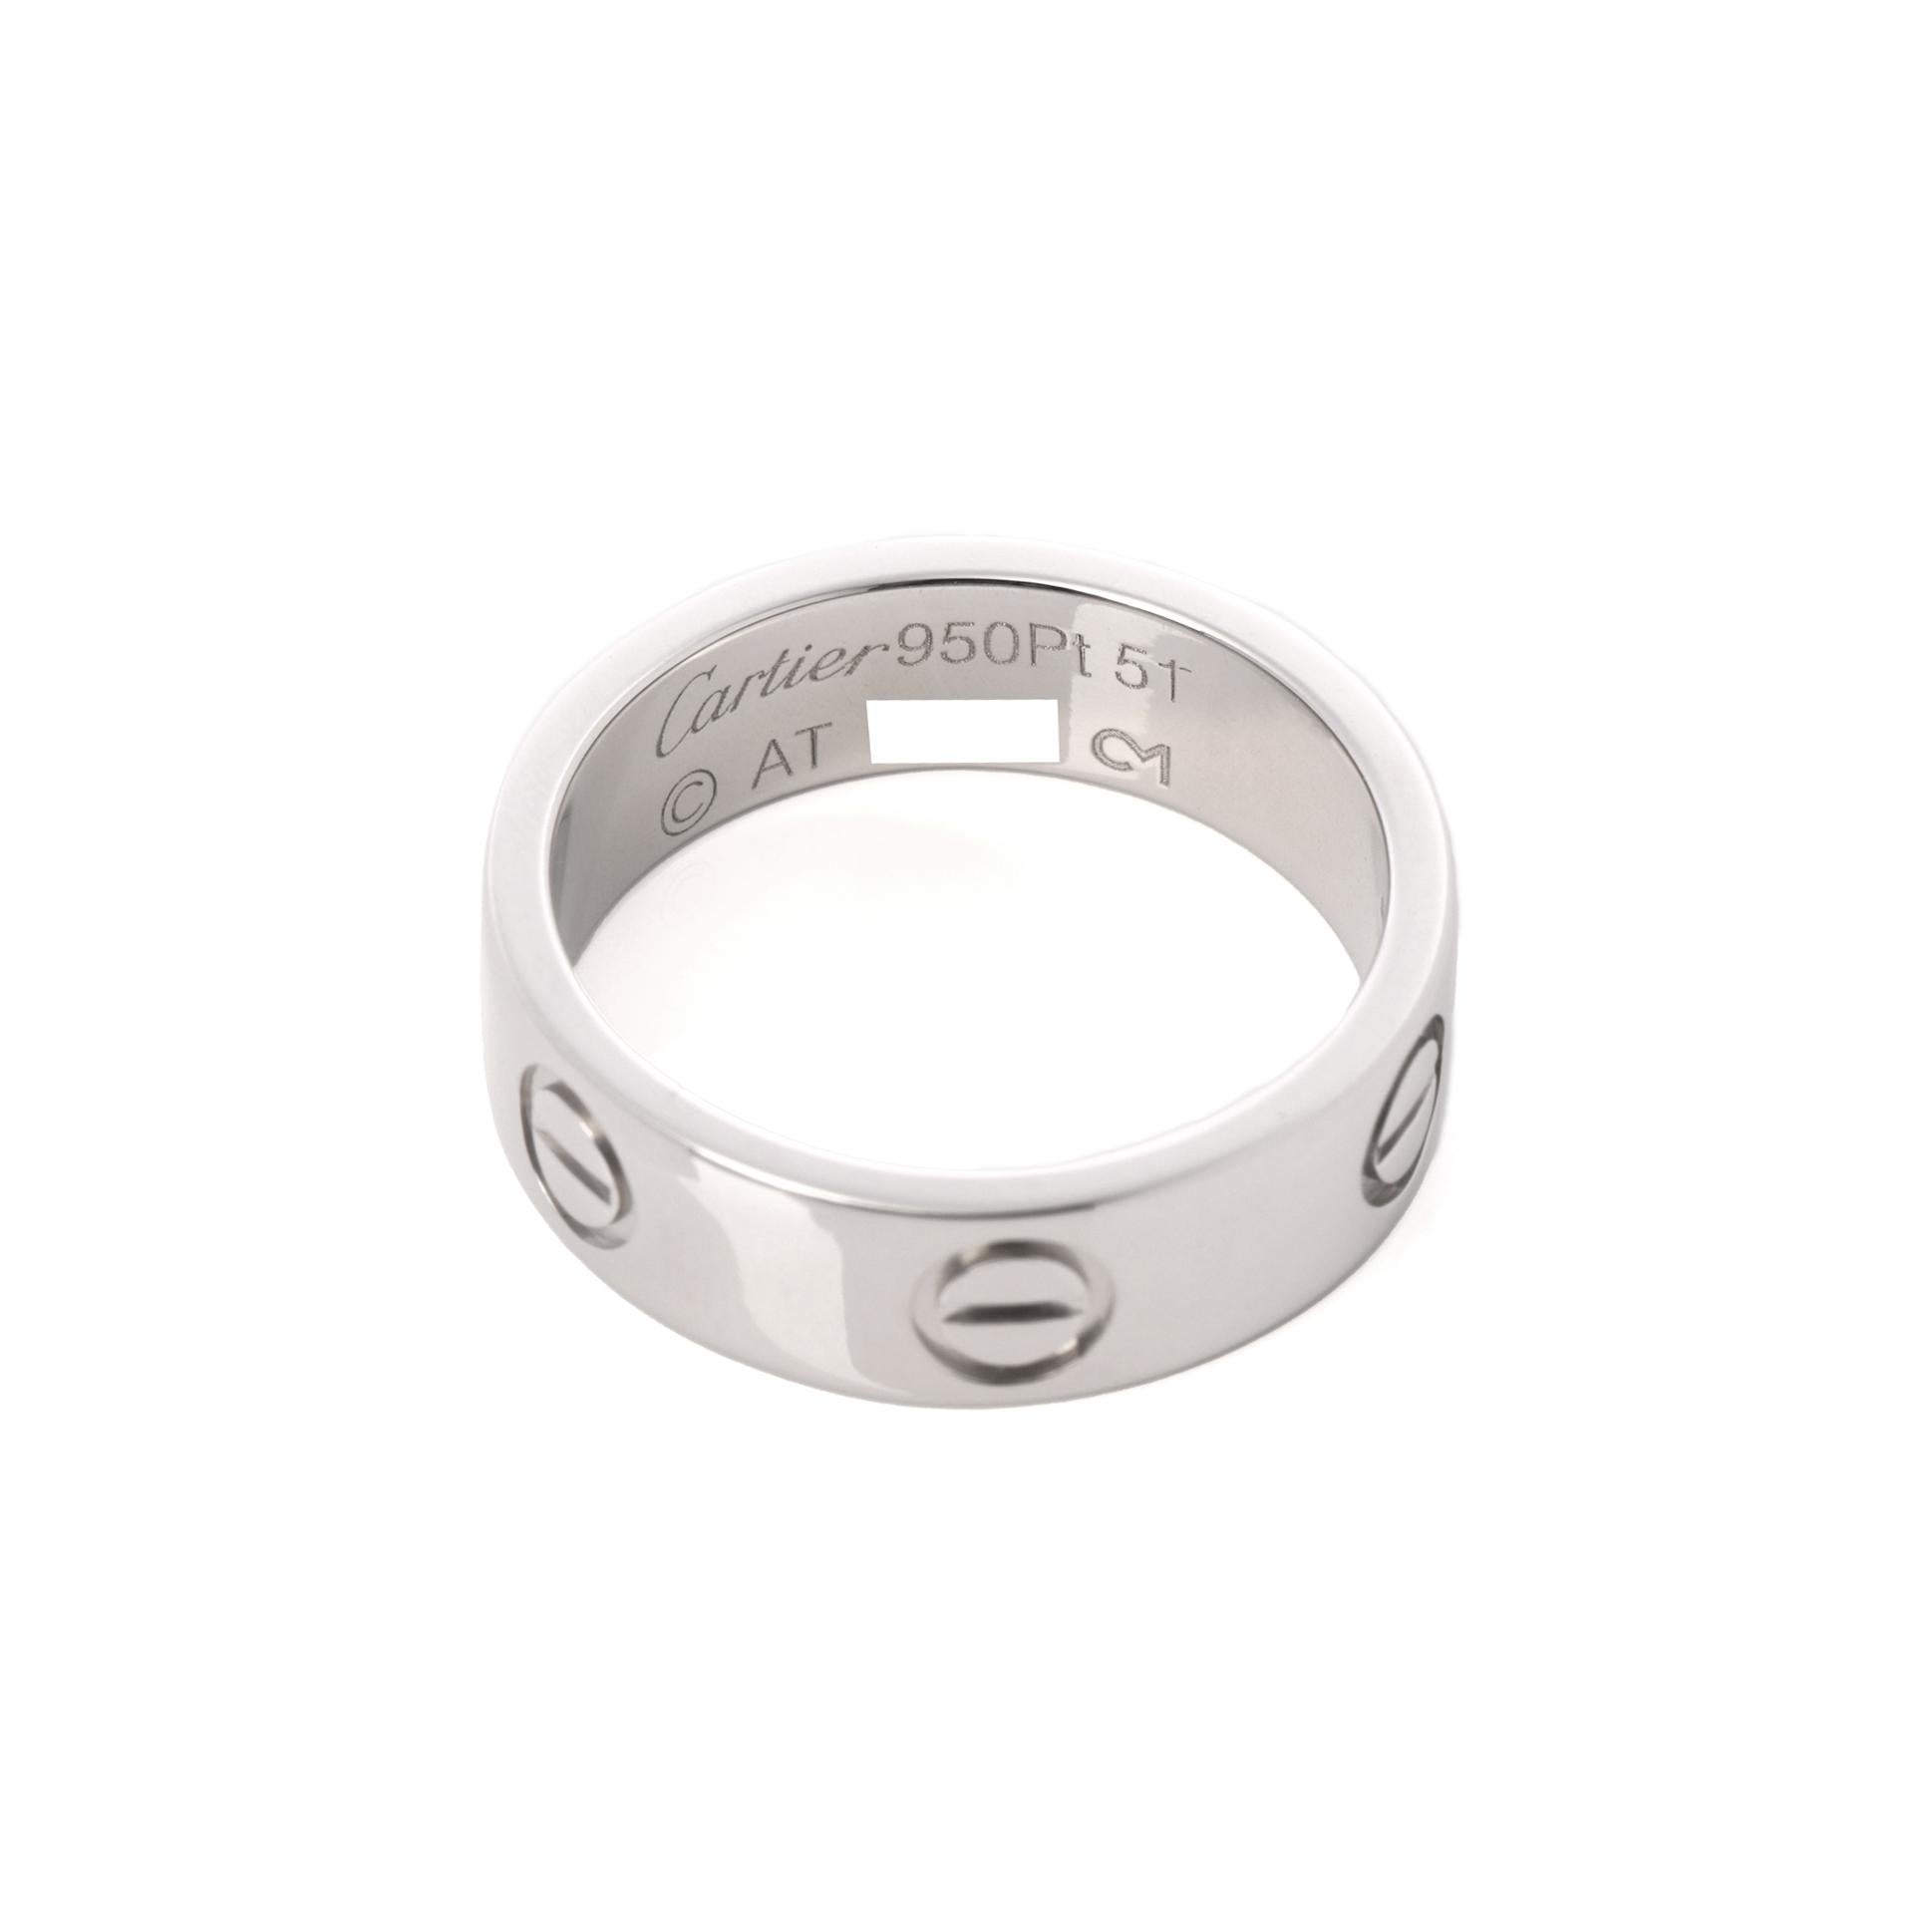 Cartier Platinum Love Band Ring

Brand Cartier
Model Platinum Love Band Ring
Product Type Ring
Serial Number AT*****
Material(s) Platinum
UK Ring Size L
EU Ring Size 51
US Ring Size 5 3/4
Resizing Possible No
Band Width 5.4mm
Total Weight 8.8g
Model